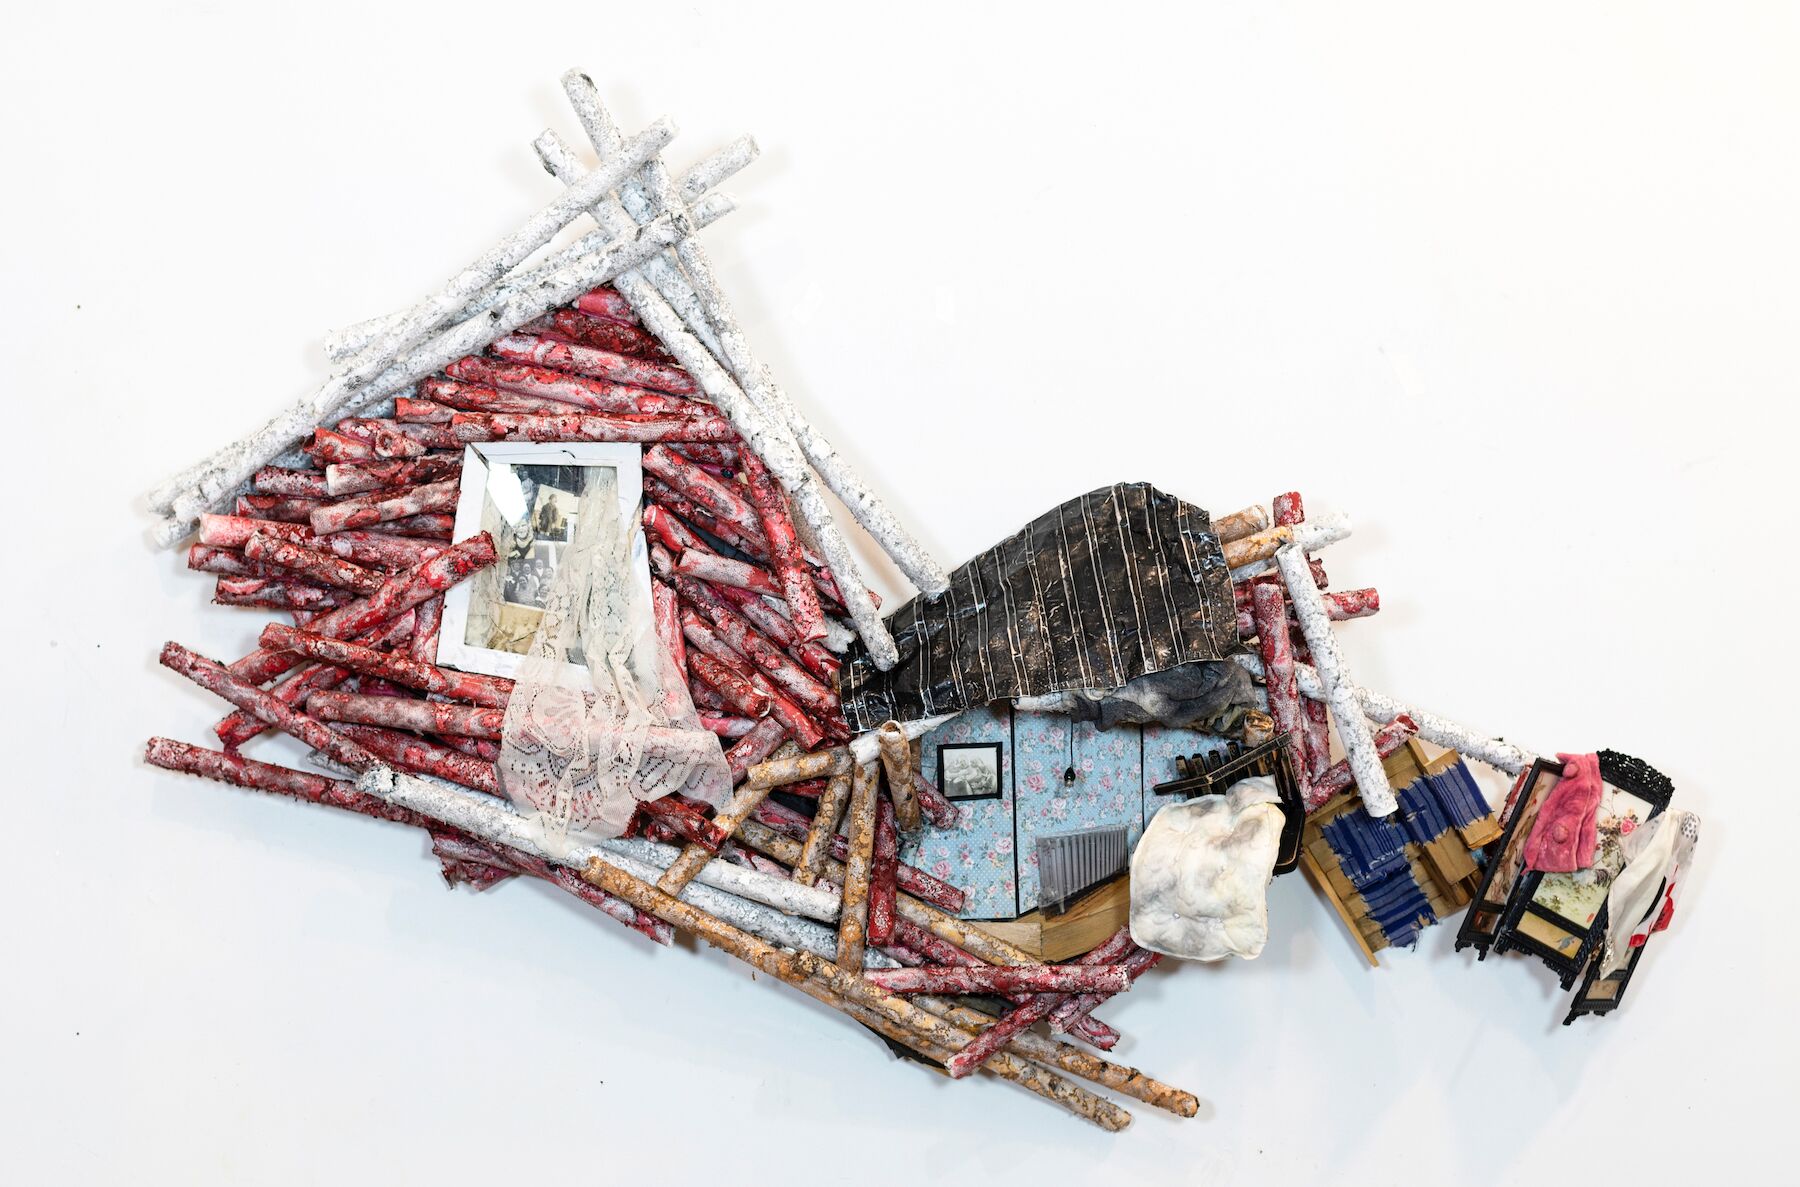   Gone Home/Home Gone: Attic Bedroom , acrylic on molded Tyvek; mixed media and found objects, 28 x 54 x 6 inches. 